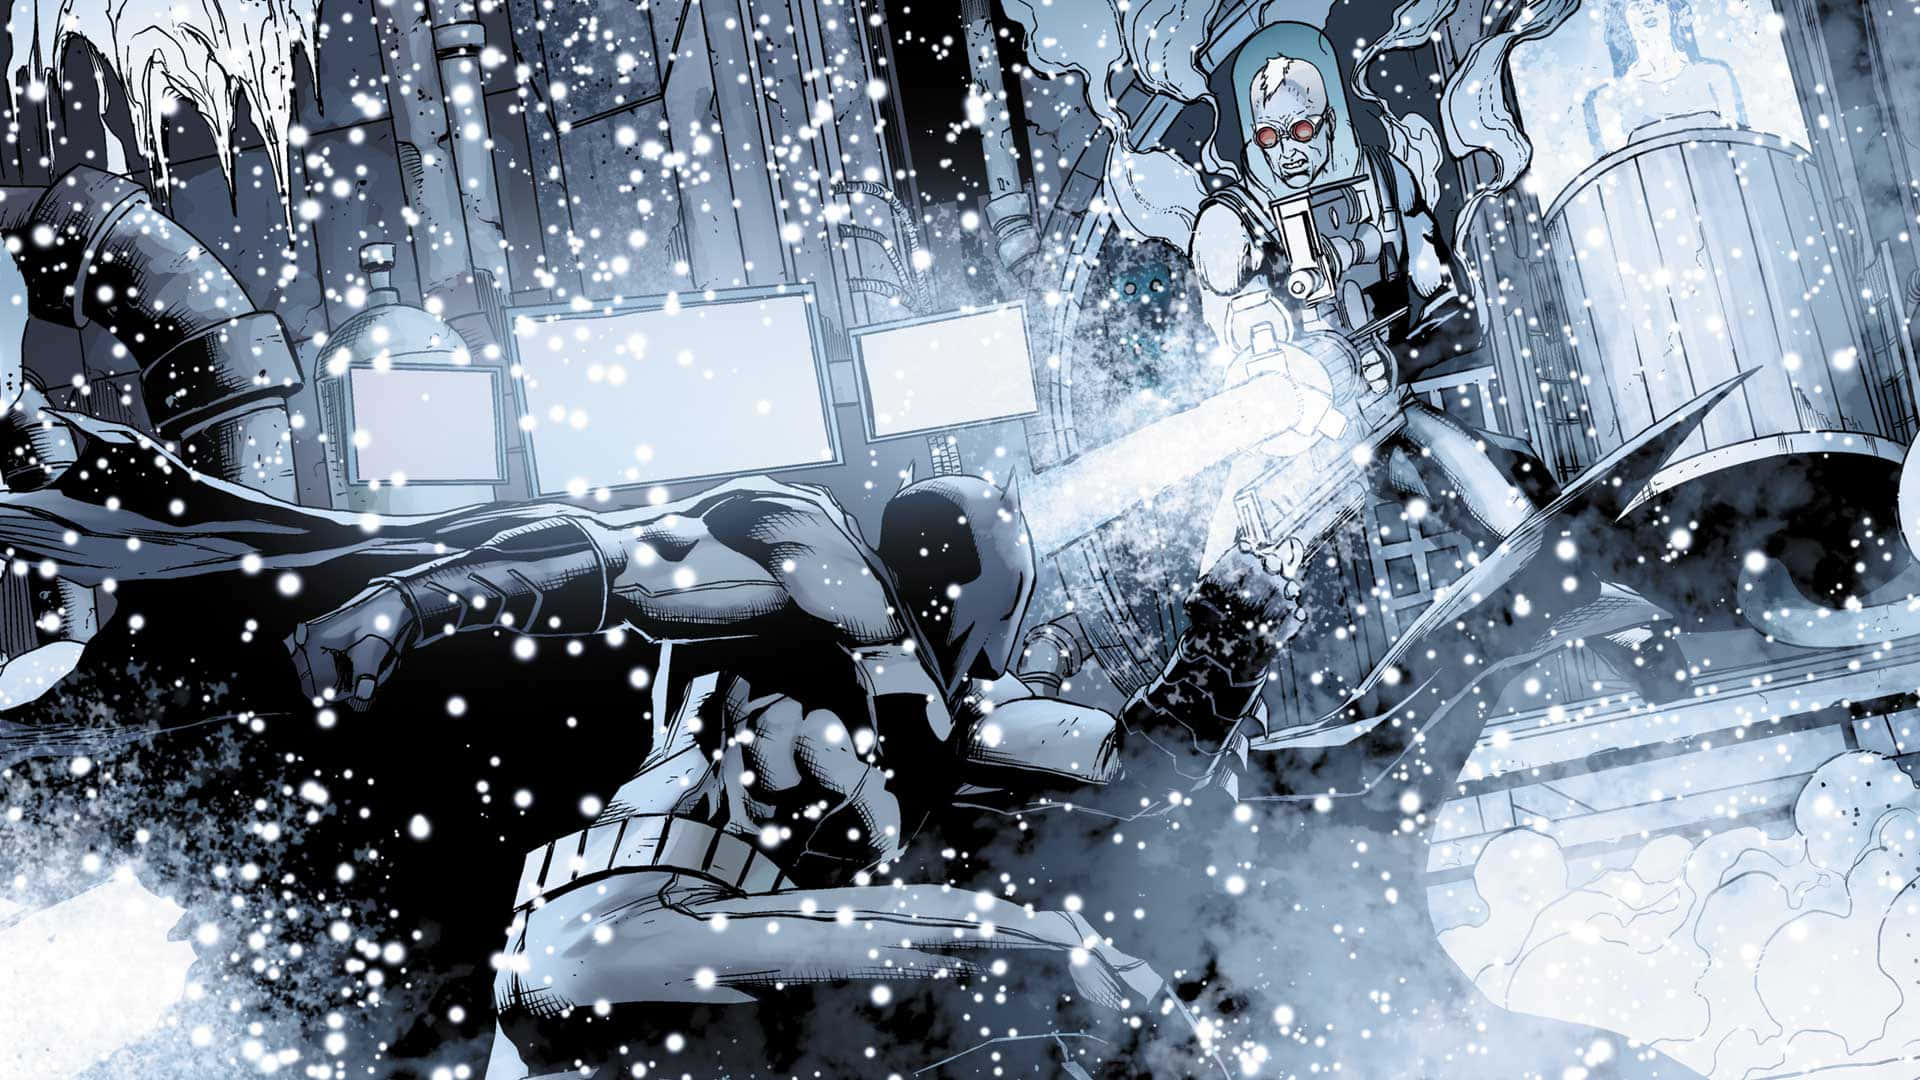 Chilling With Mr. Freeze - Experience The Icy Stare Of Gotham's Coldest Villain Background